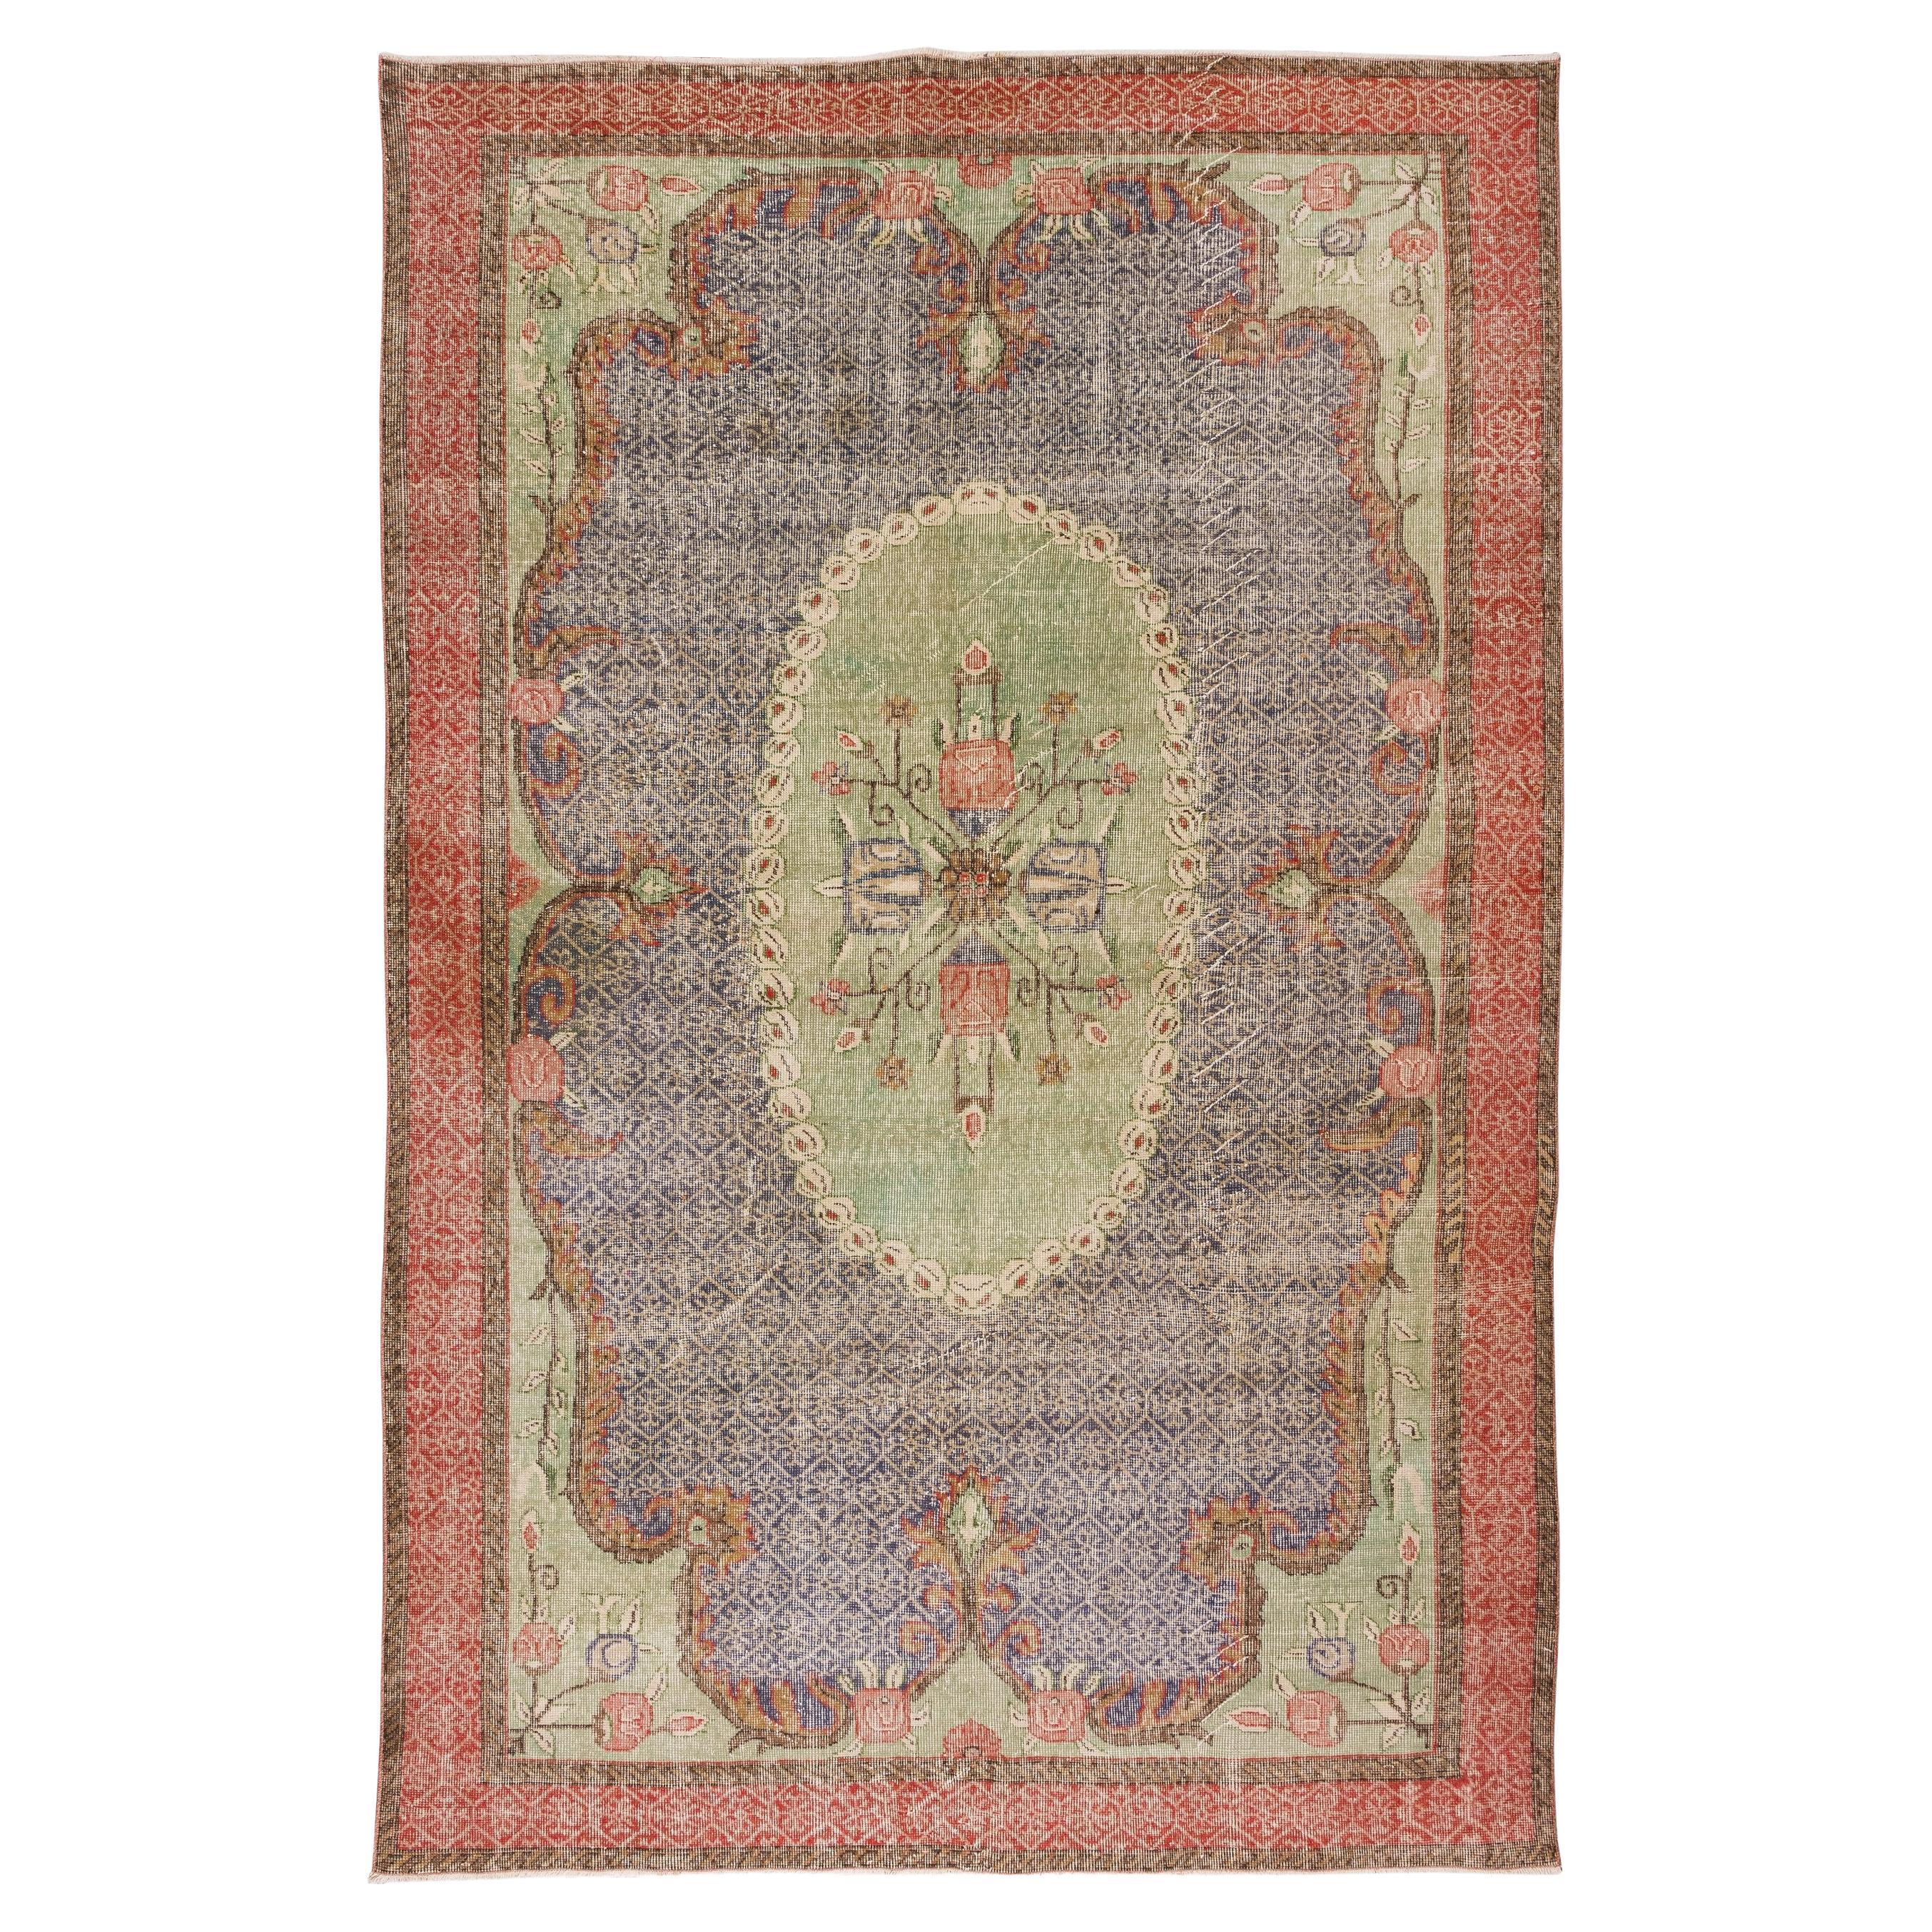 7x10.2 Ft Mid-20th Century Hand Knotted Floral Central Anatolian Wool Area Rug